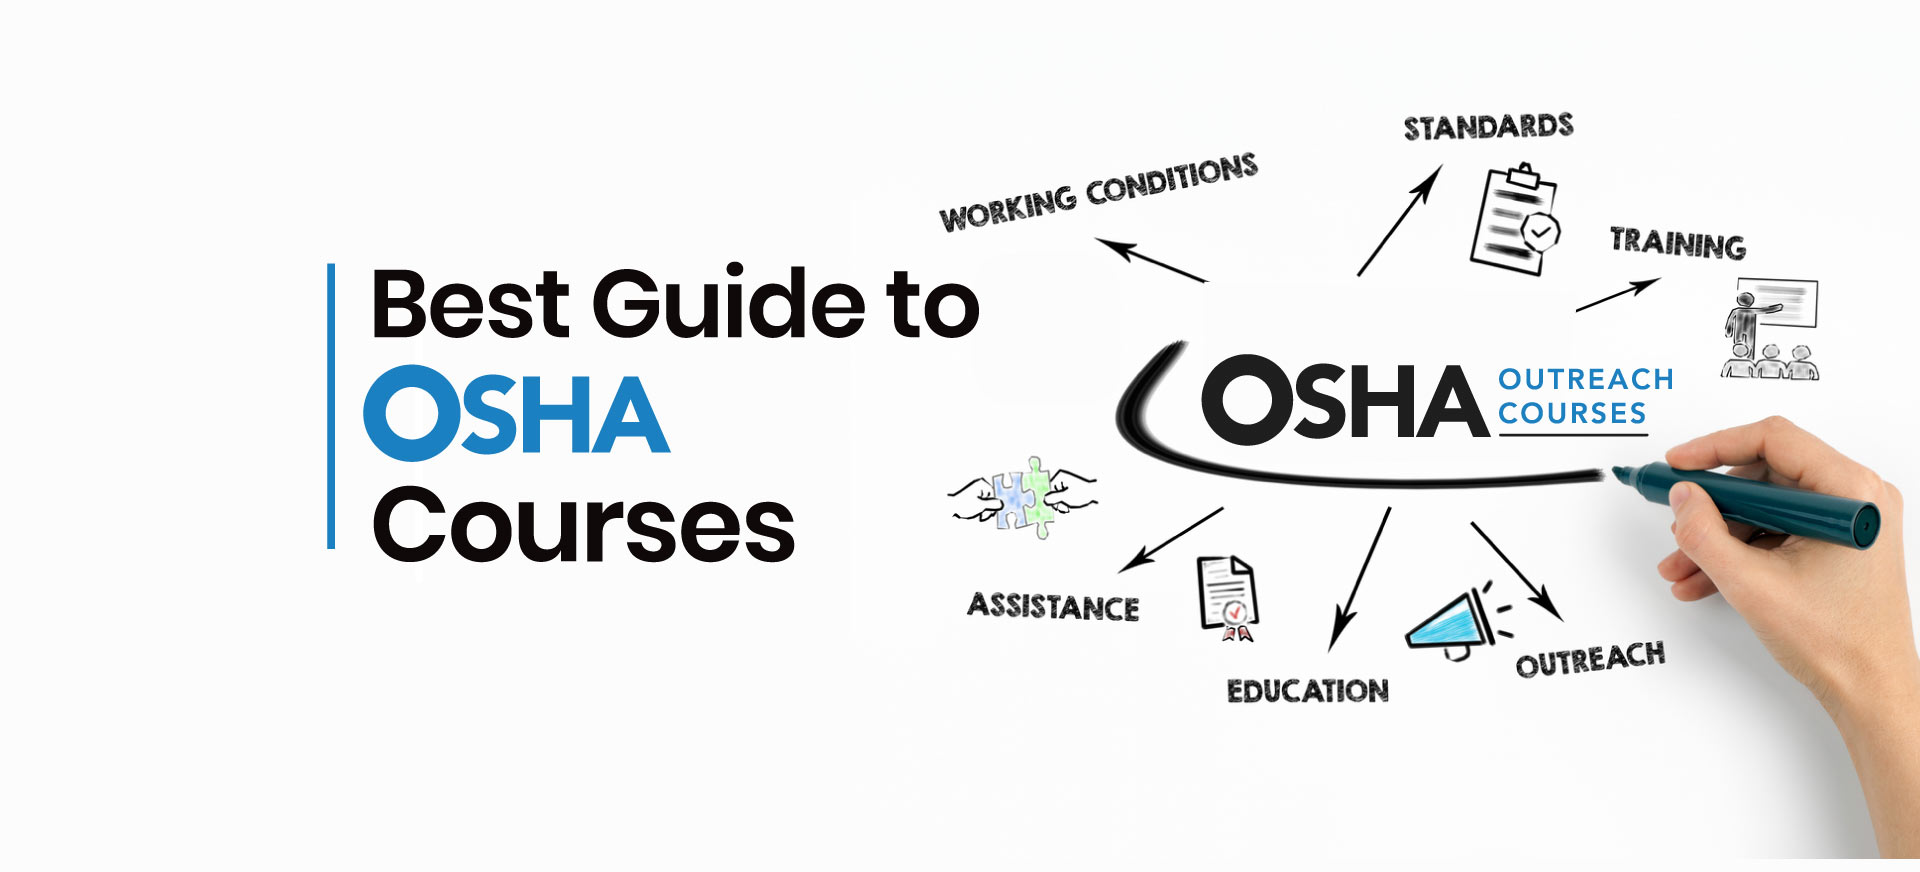 Best Guide to OSHA Courses and How They Work in Practice